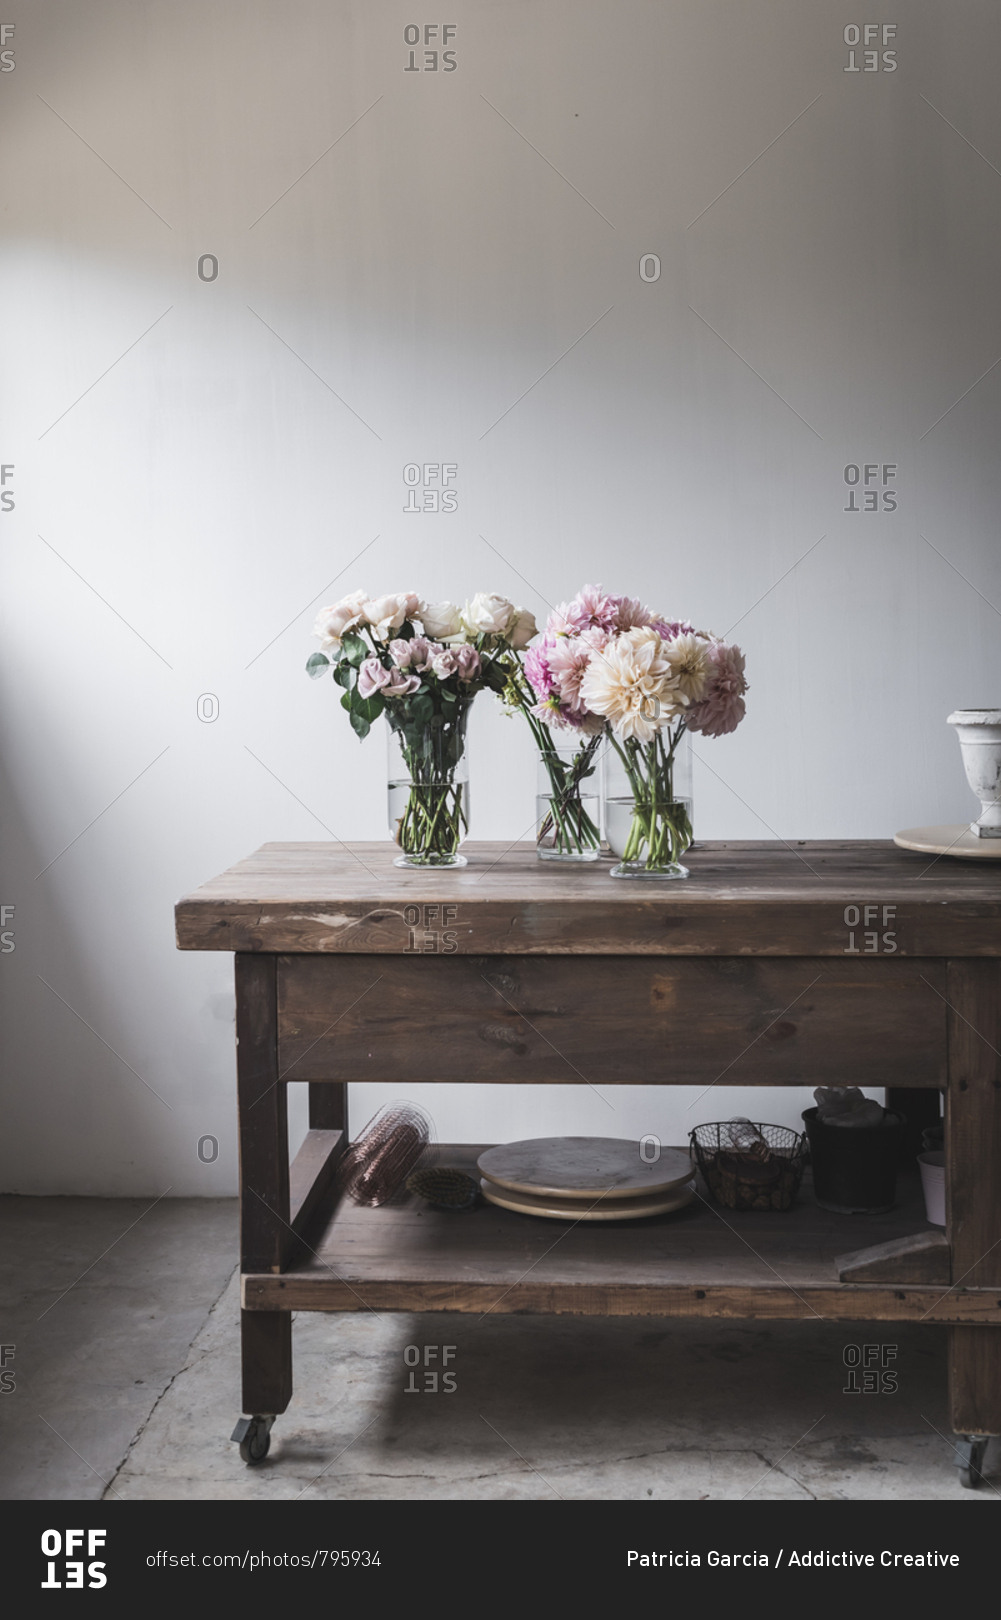 Wooden table with kitchenware and bouquets of fresh blooms in vases with water near white wall